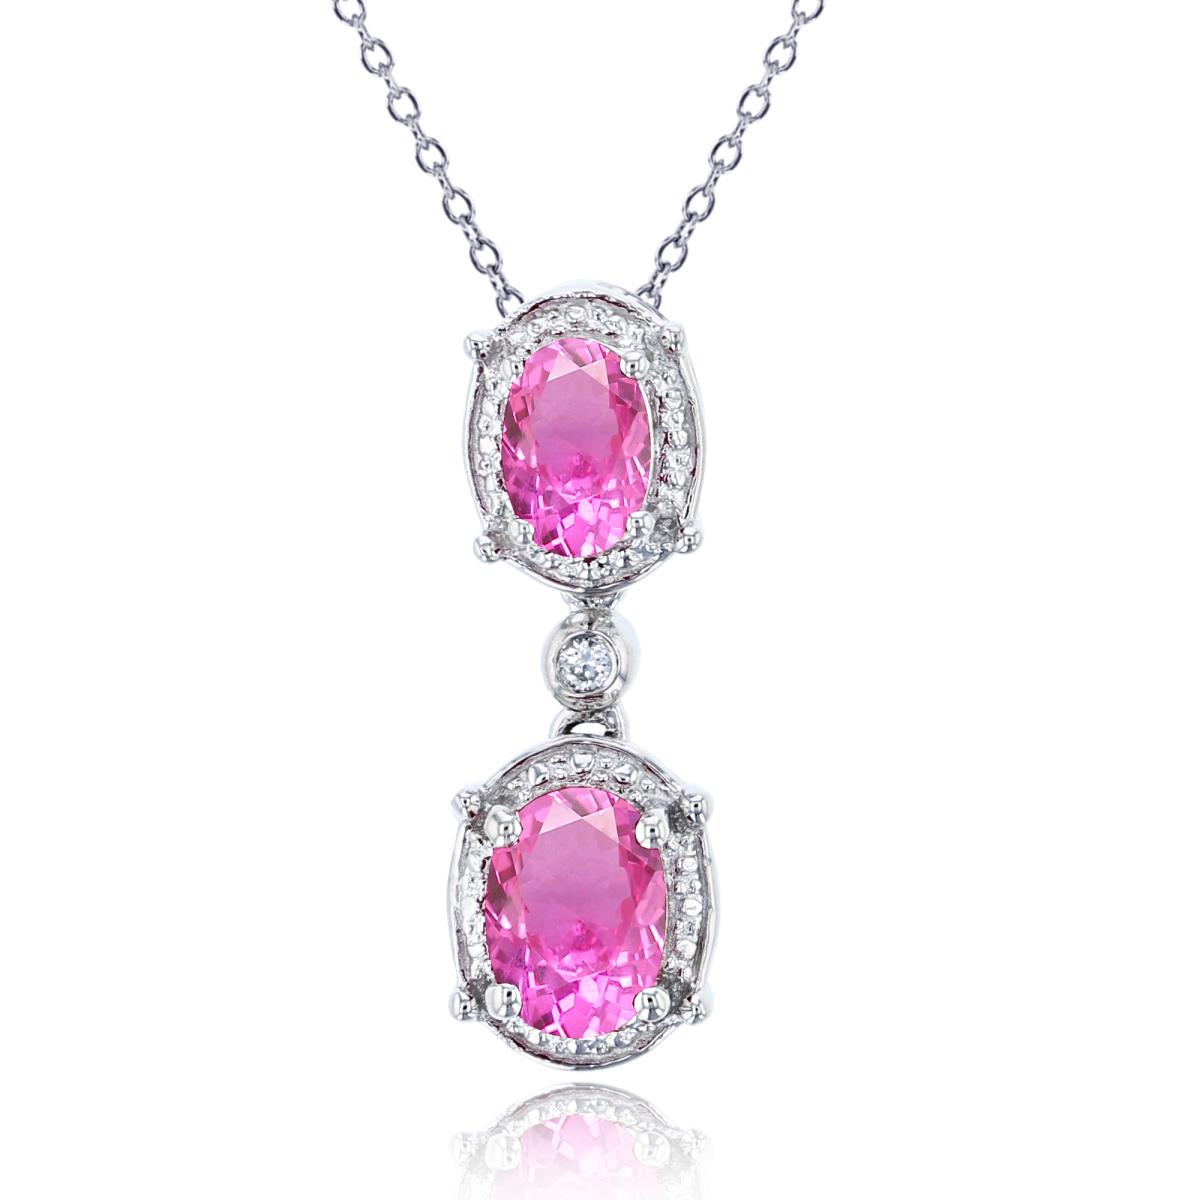 Sterling Silver Rhodium 7x5mm/6x4mm Oval Cr Pink Sapphire & 1.5mm Cr White Sapphire Dangling 18"Necklace